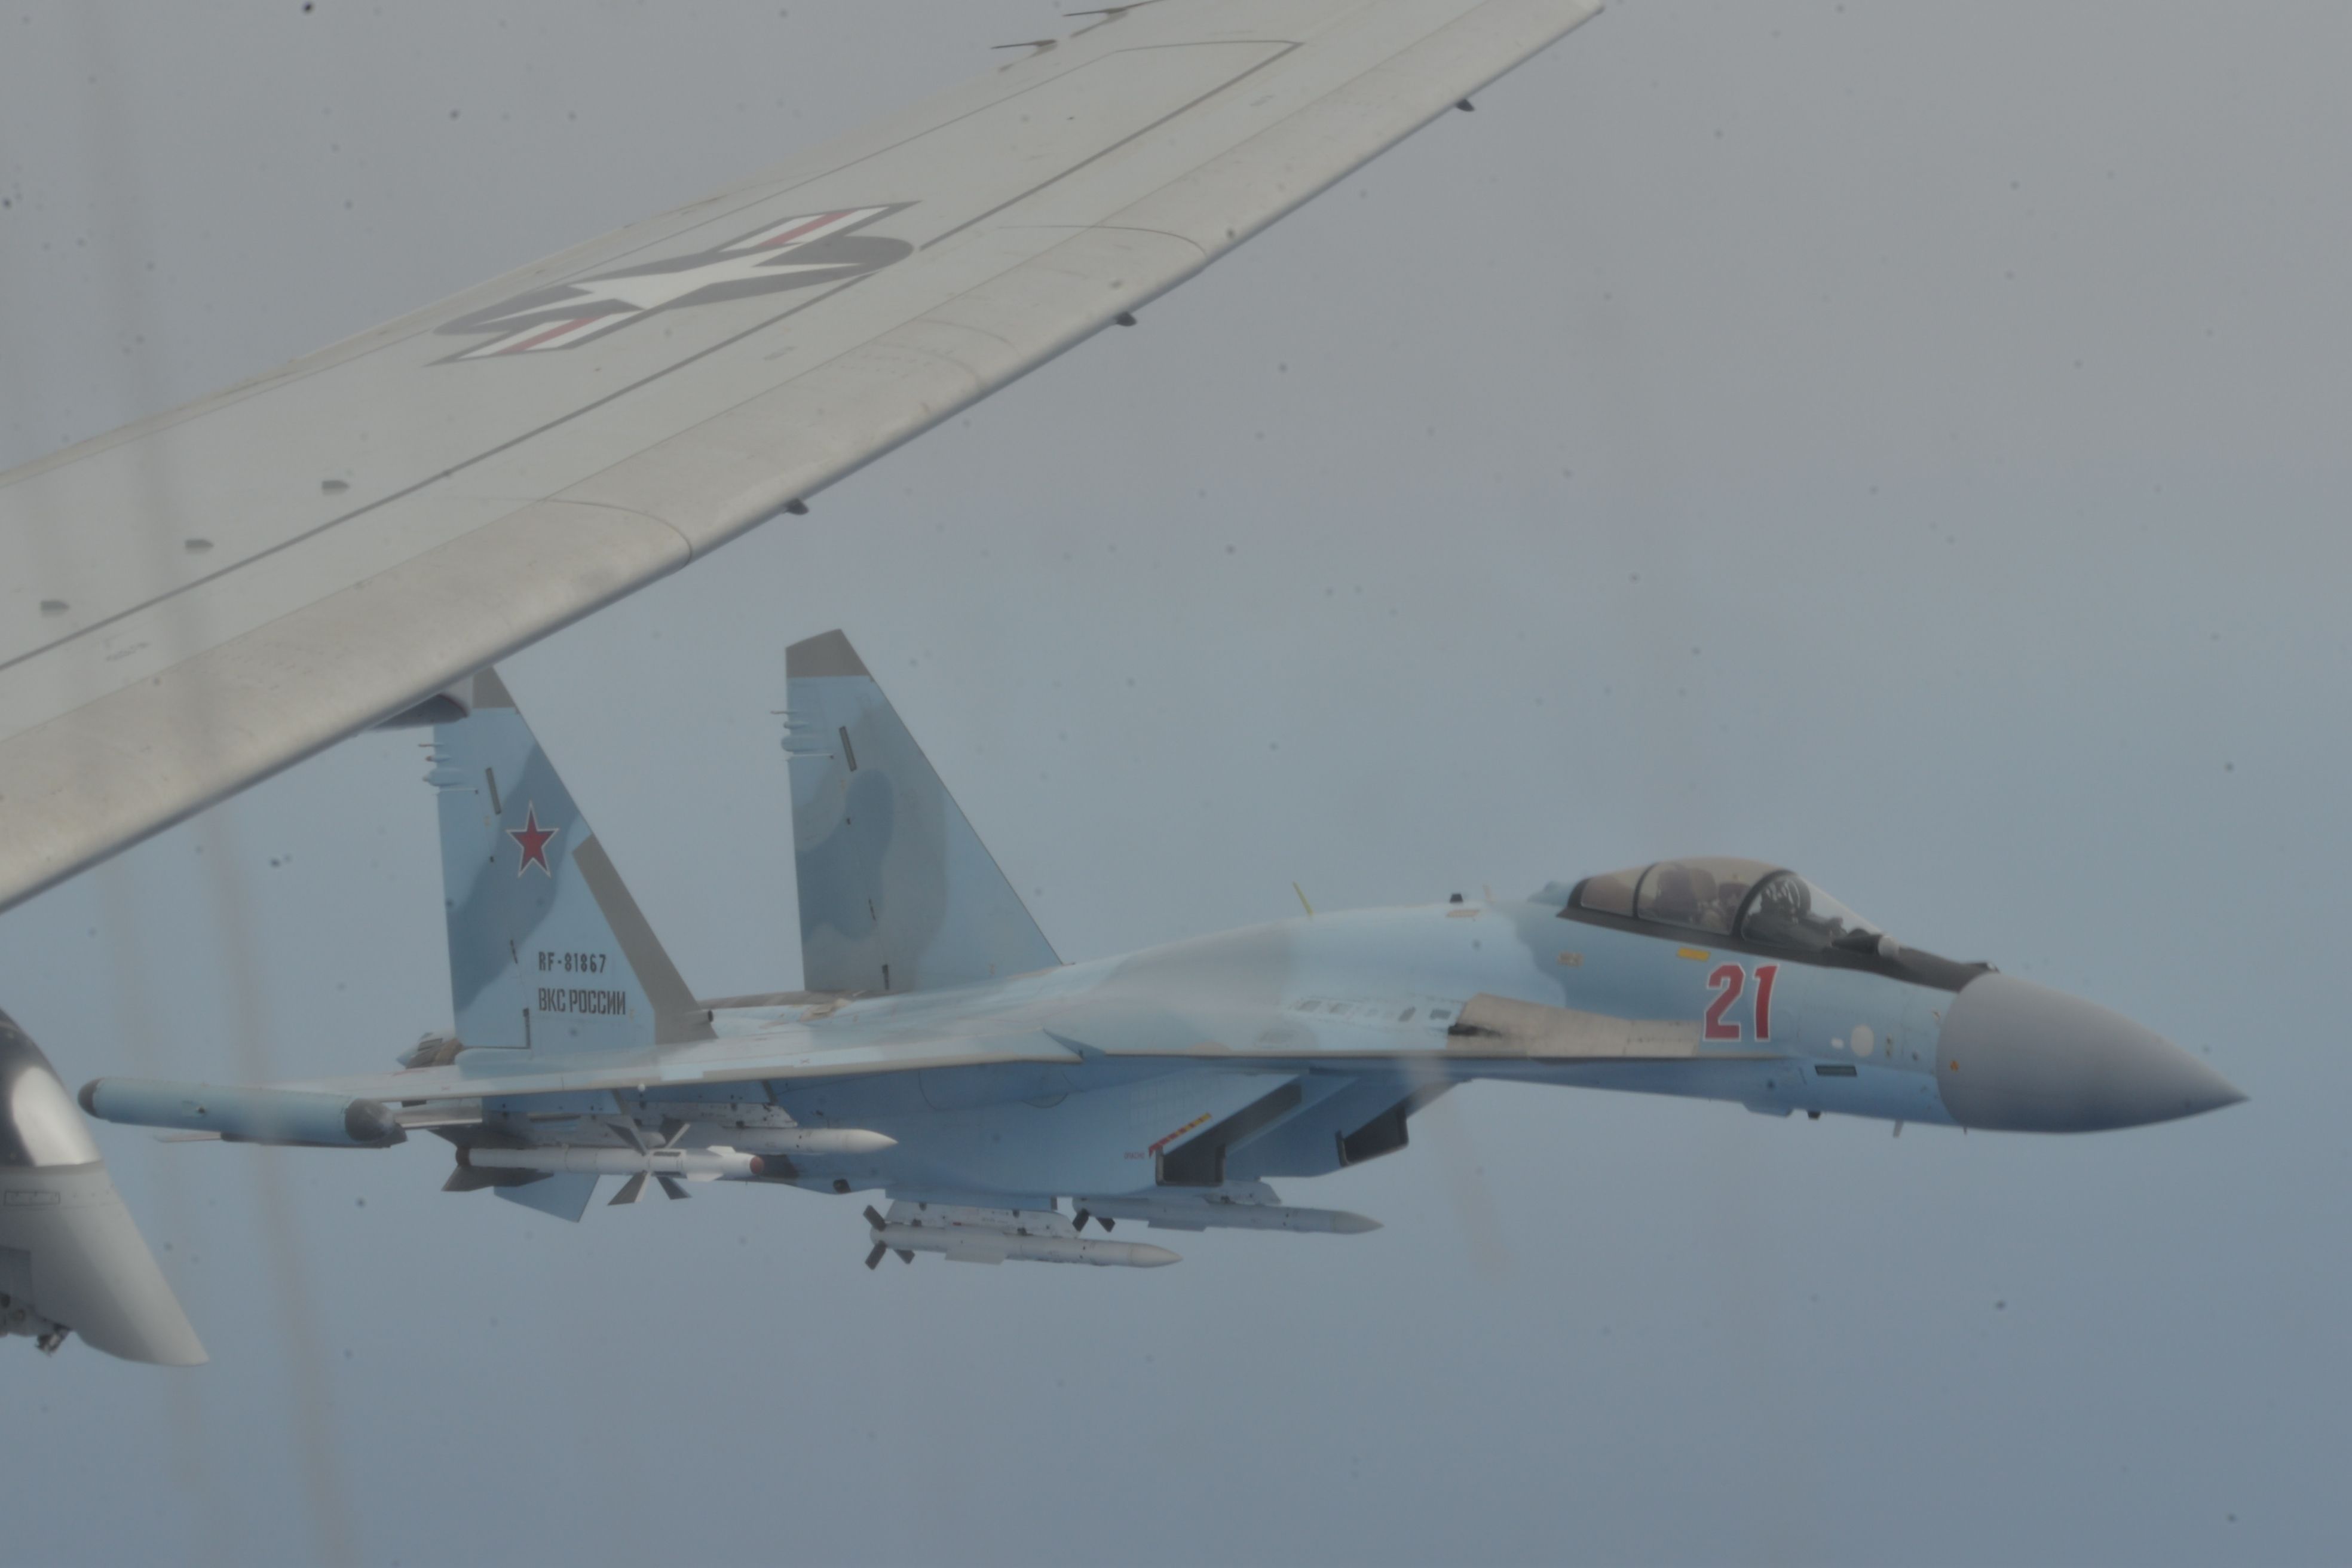 A Russian Su-35 aircraft flying in the sky.